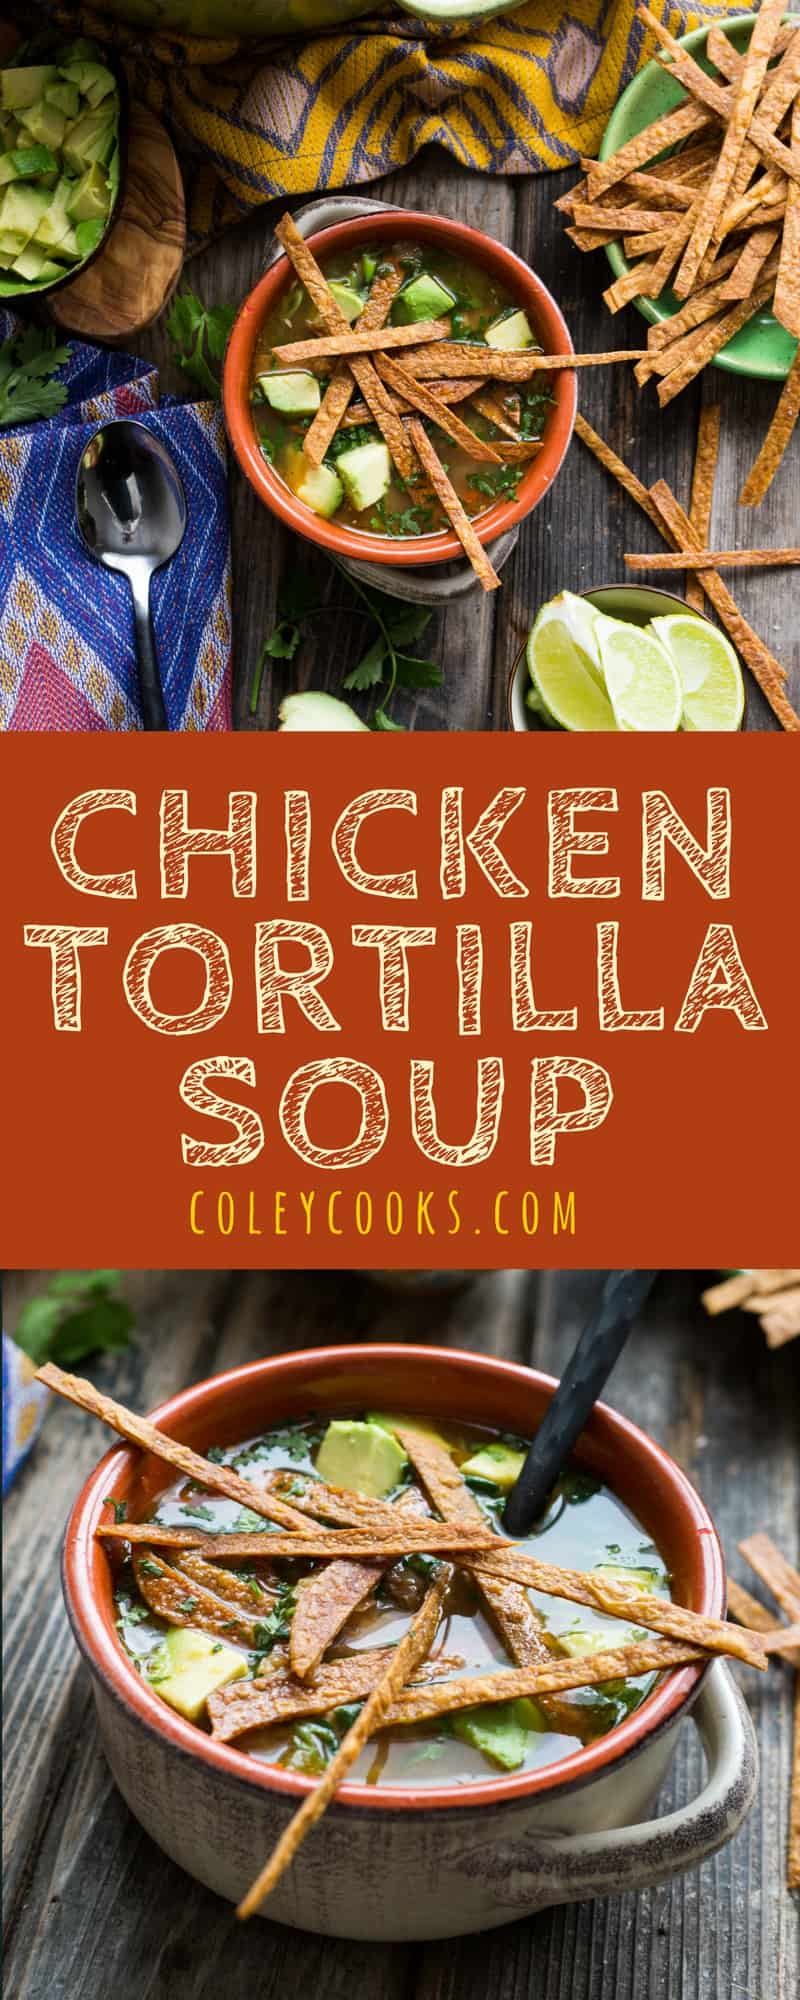 CHICKEN TORTILLA SOUP | Full of flavor, super healthy, and easy to make! This chicken tortilla soup hits all the marks. Also freezer friendly! | ColeyCooks.com